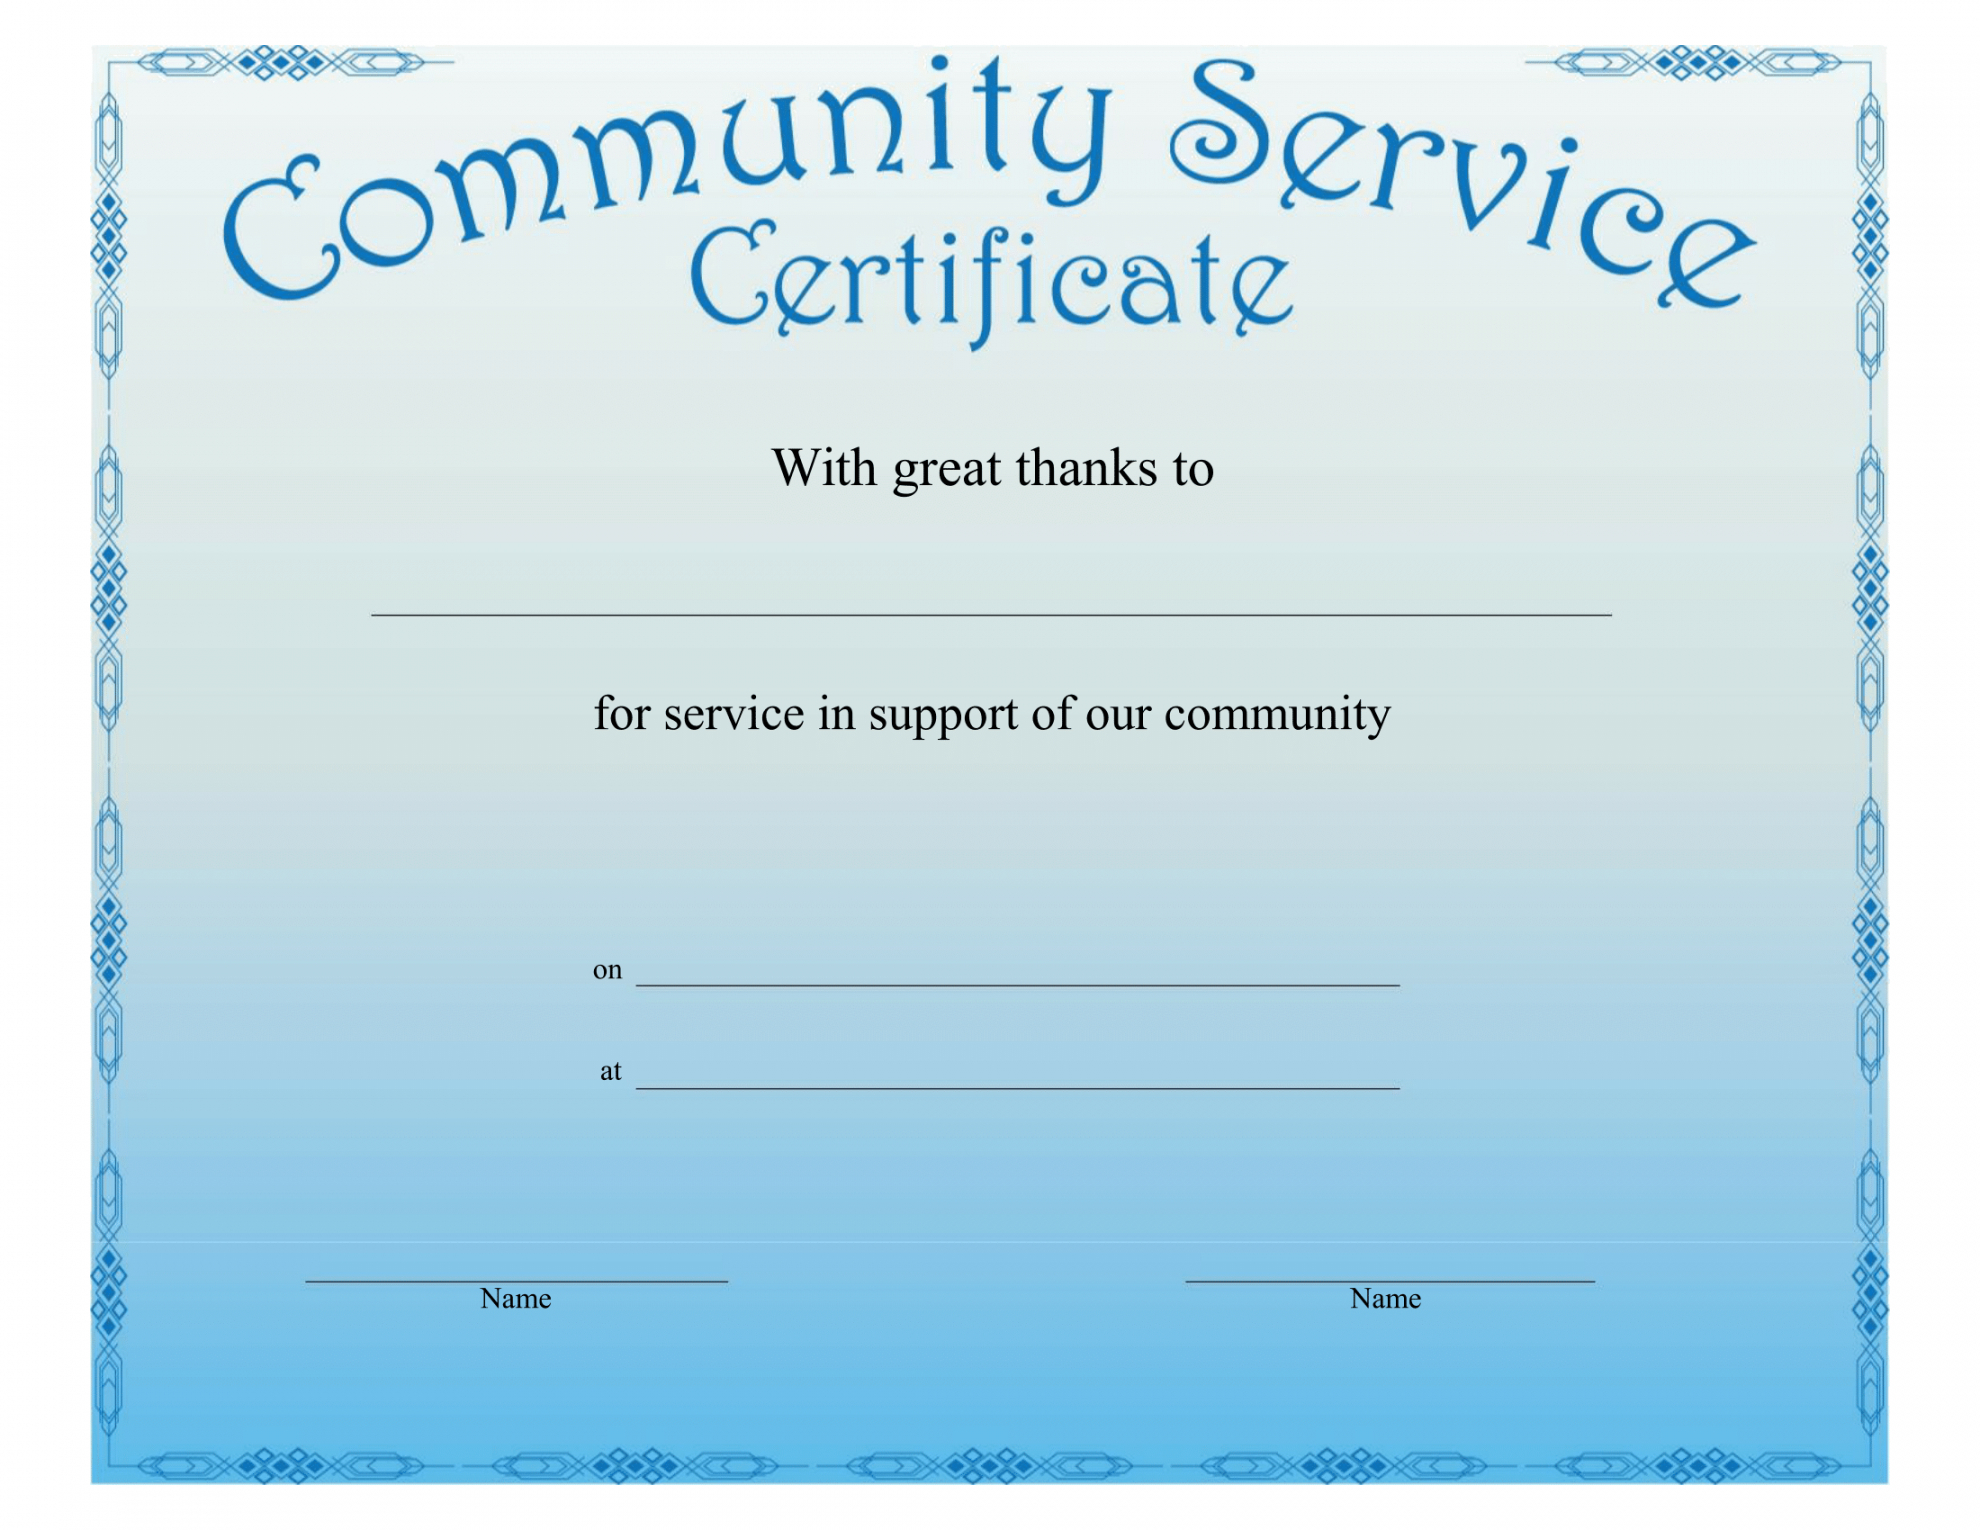 Printable Community Service Certificate Free Download Pertaining To Blank Certificate Templates Free Download